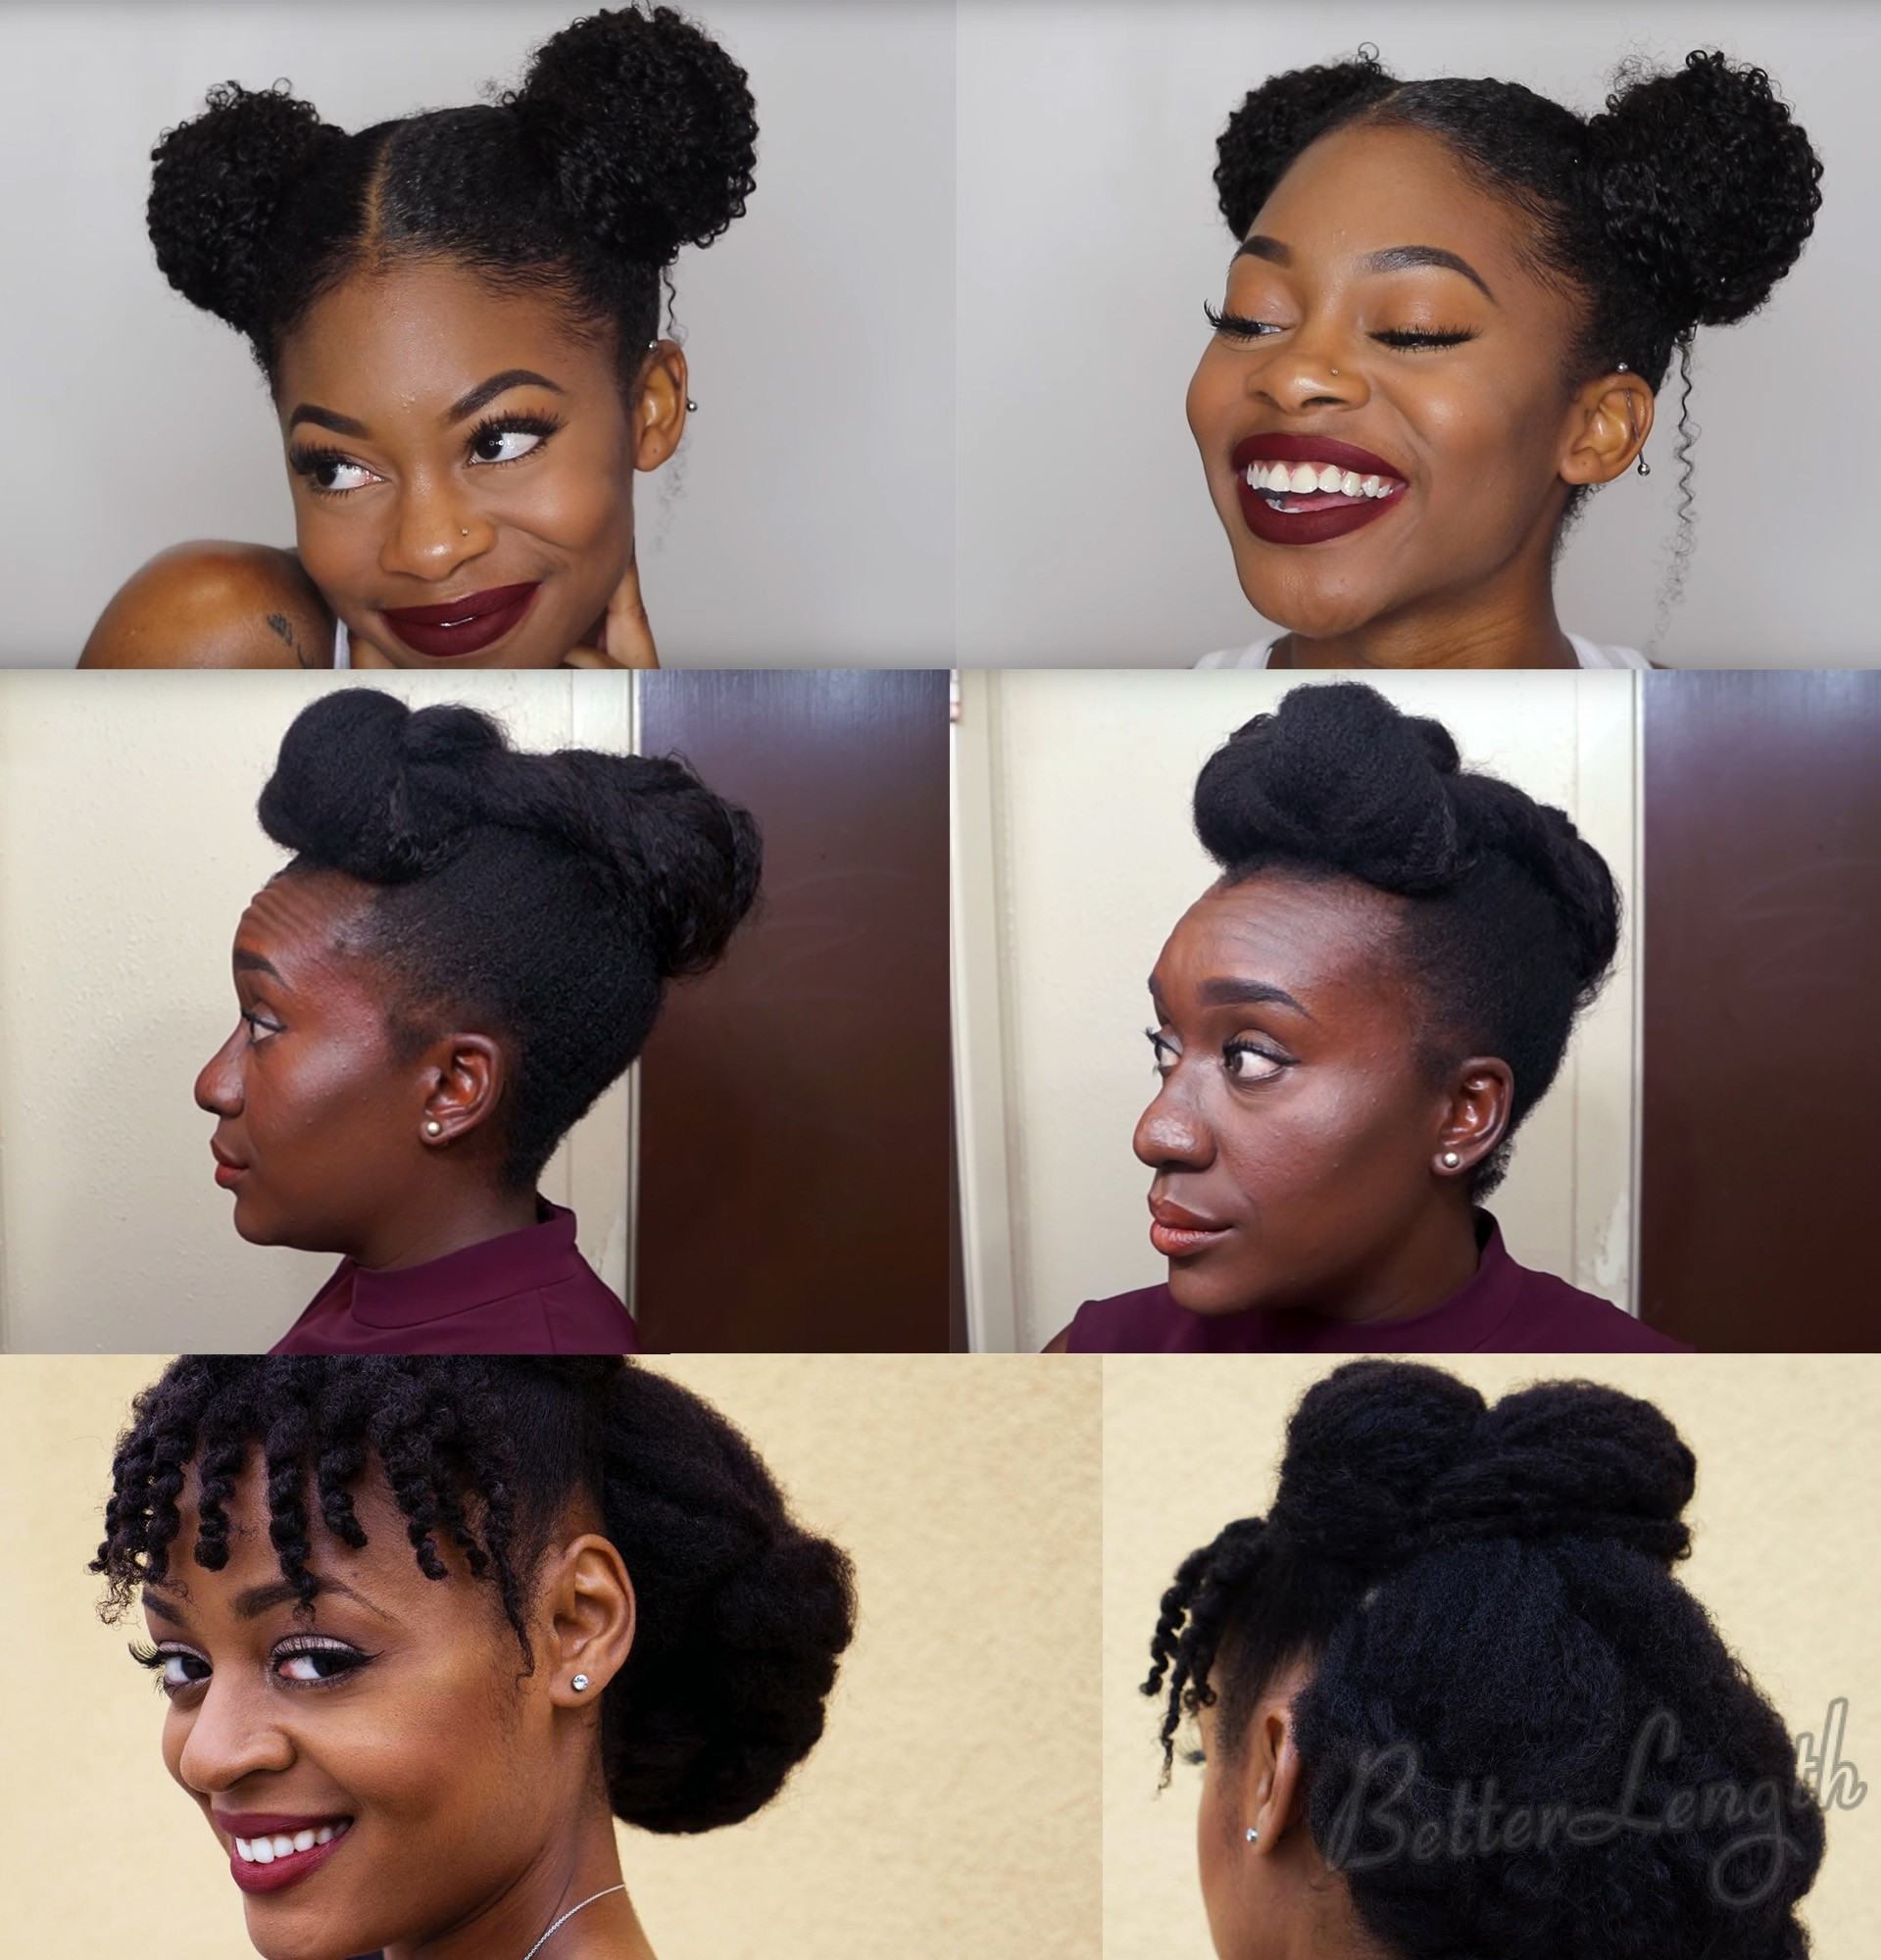 Easy Natural Updo Hairstyles
 TOP 6 Quick & Easy Natural Hair Updos